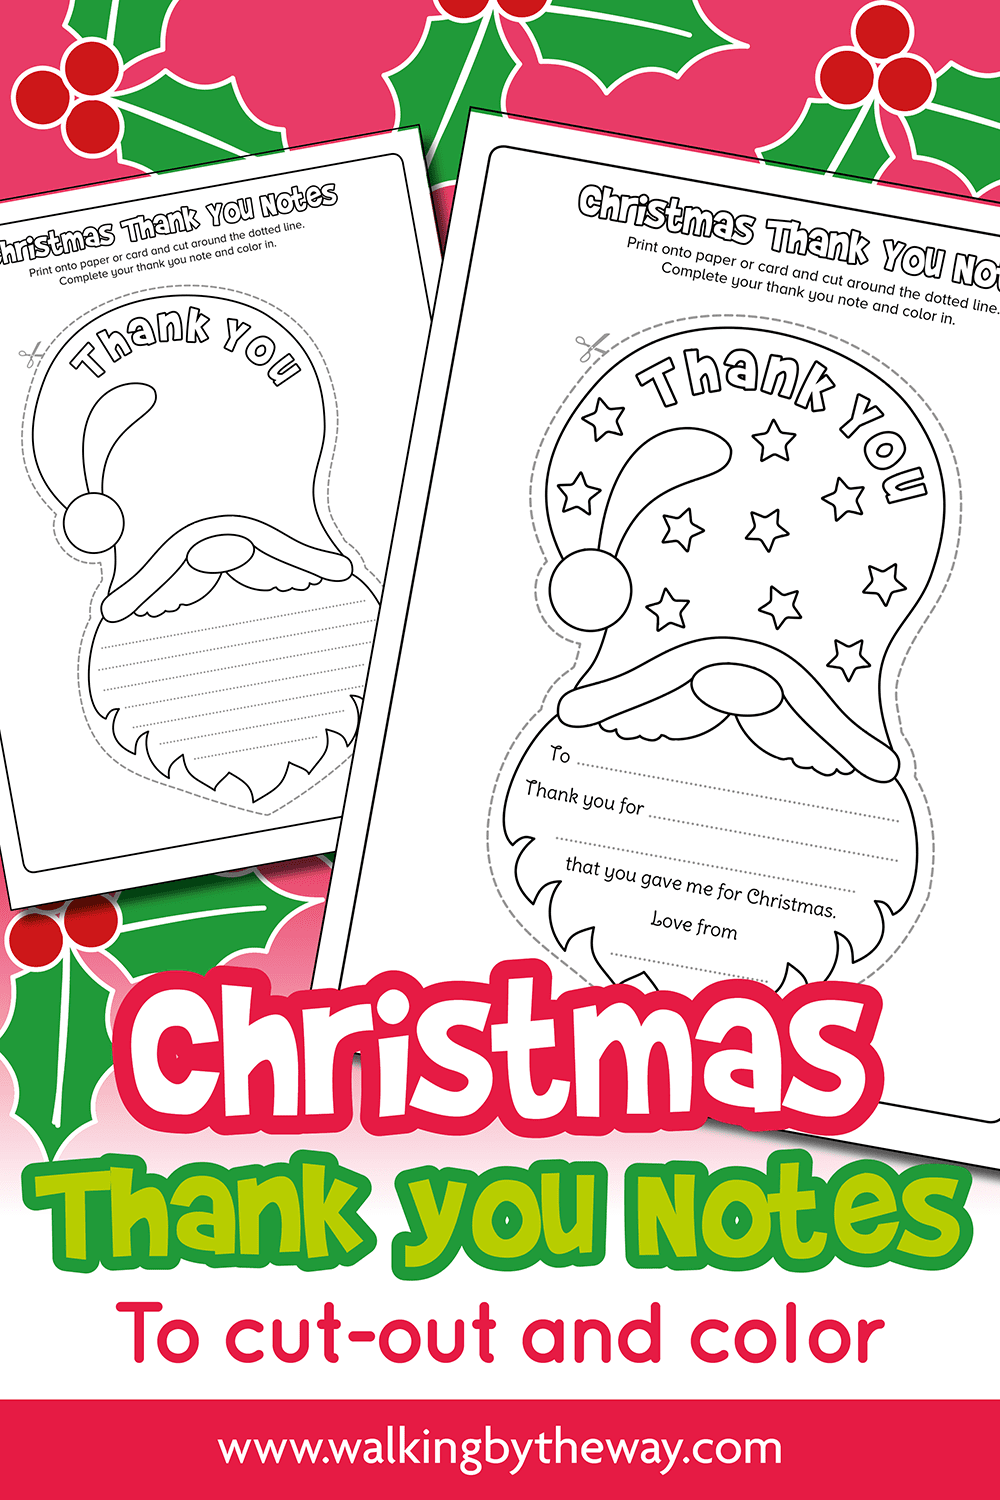 free-printable-christmas-thank-you-notes-for-kids-walking-by-the-way